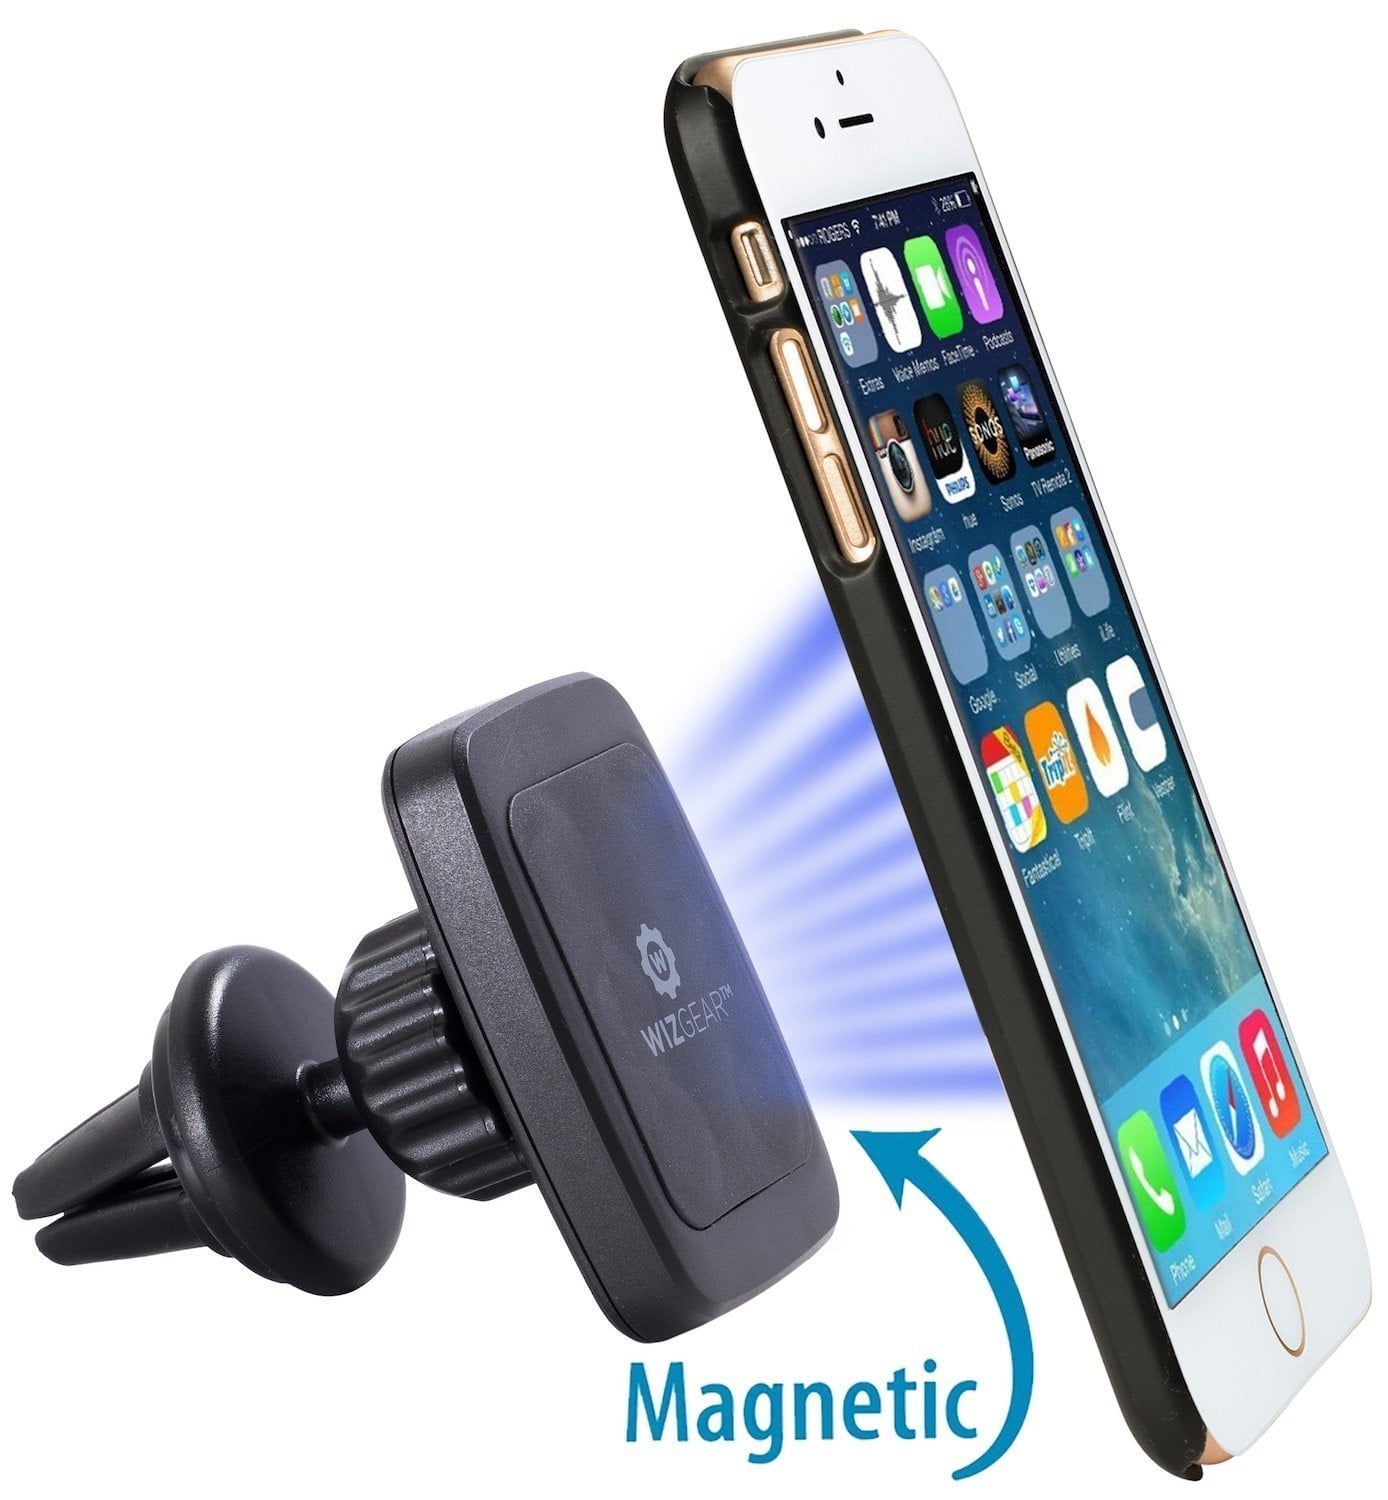 Phone Holder for Car WizGear 3-in-1 Universal Car Phone Mount Cell Phone Car Mount Air Vent Holder with Dashboard Mount and Windshield Mount for Cell Phones